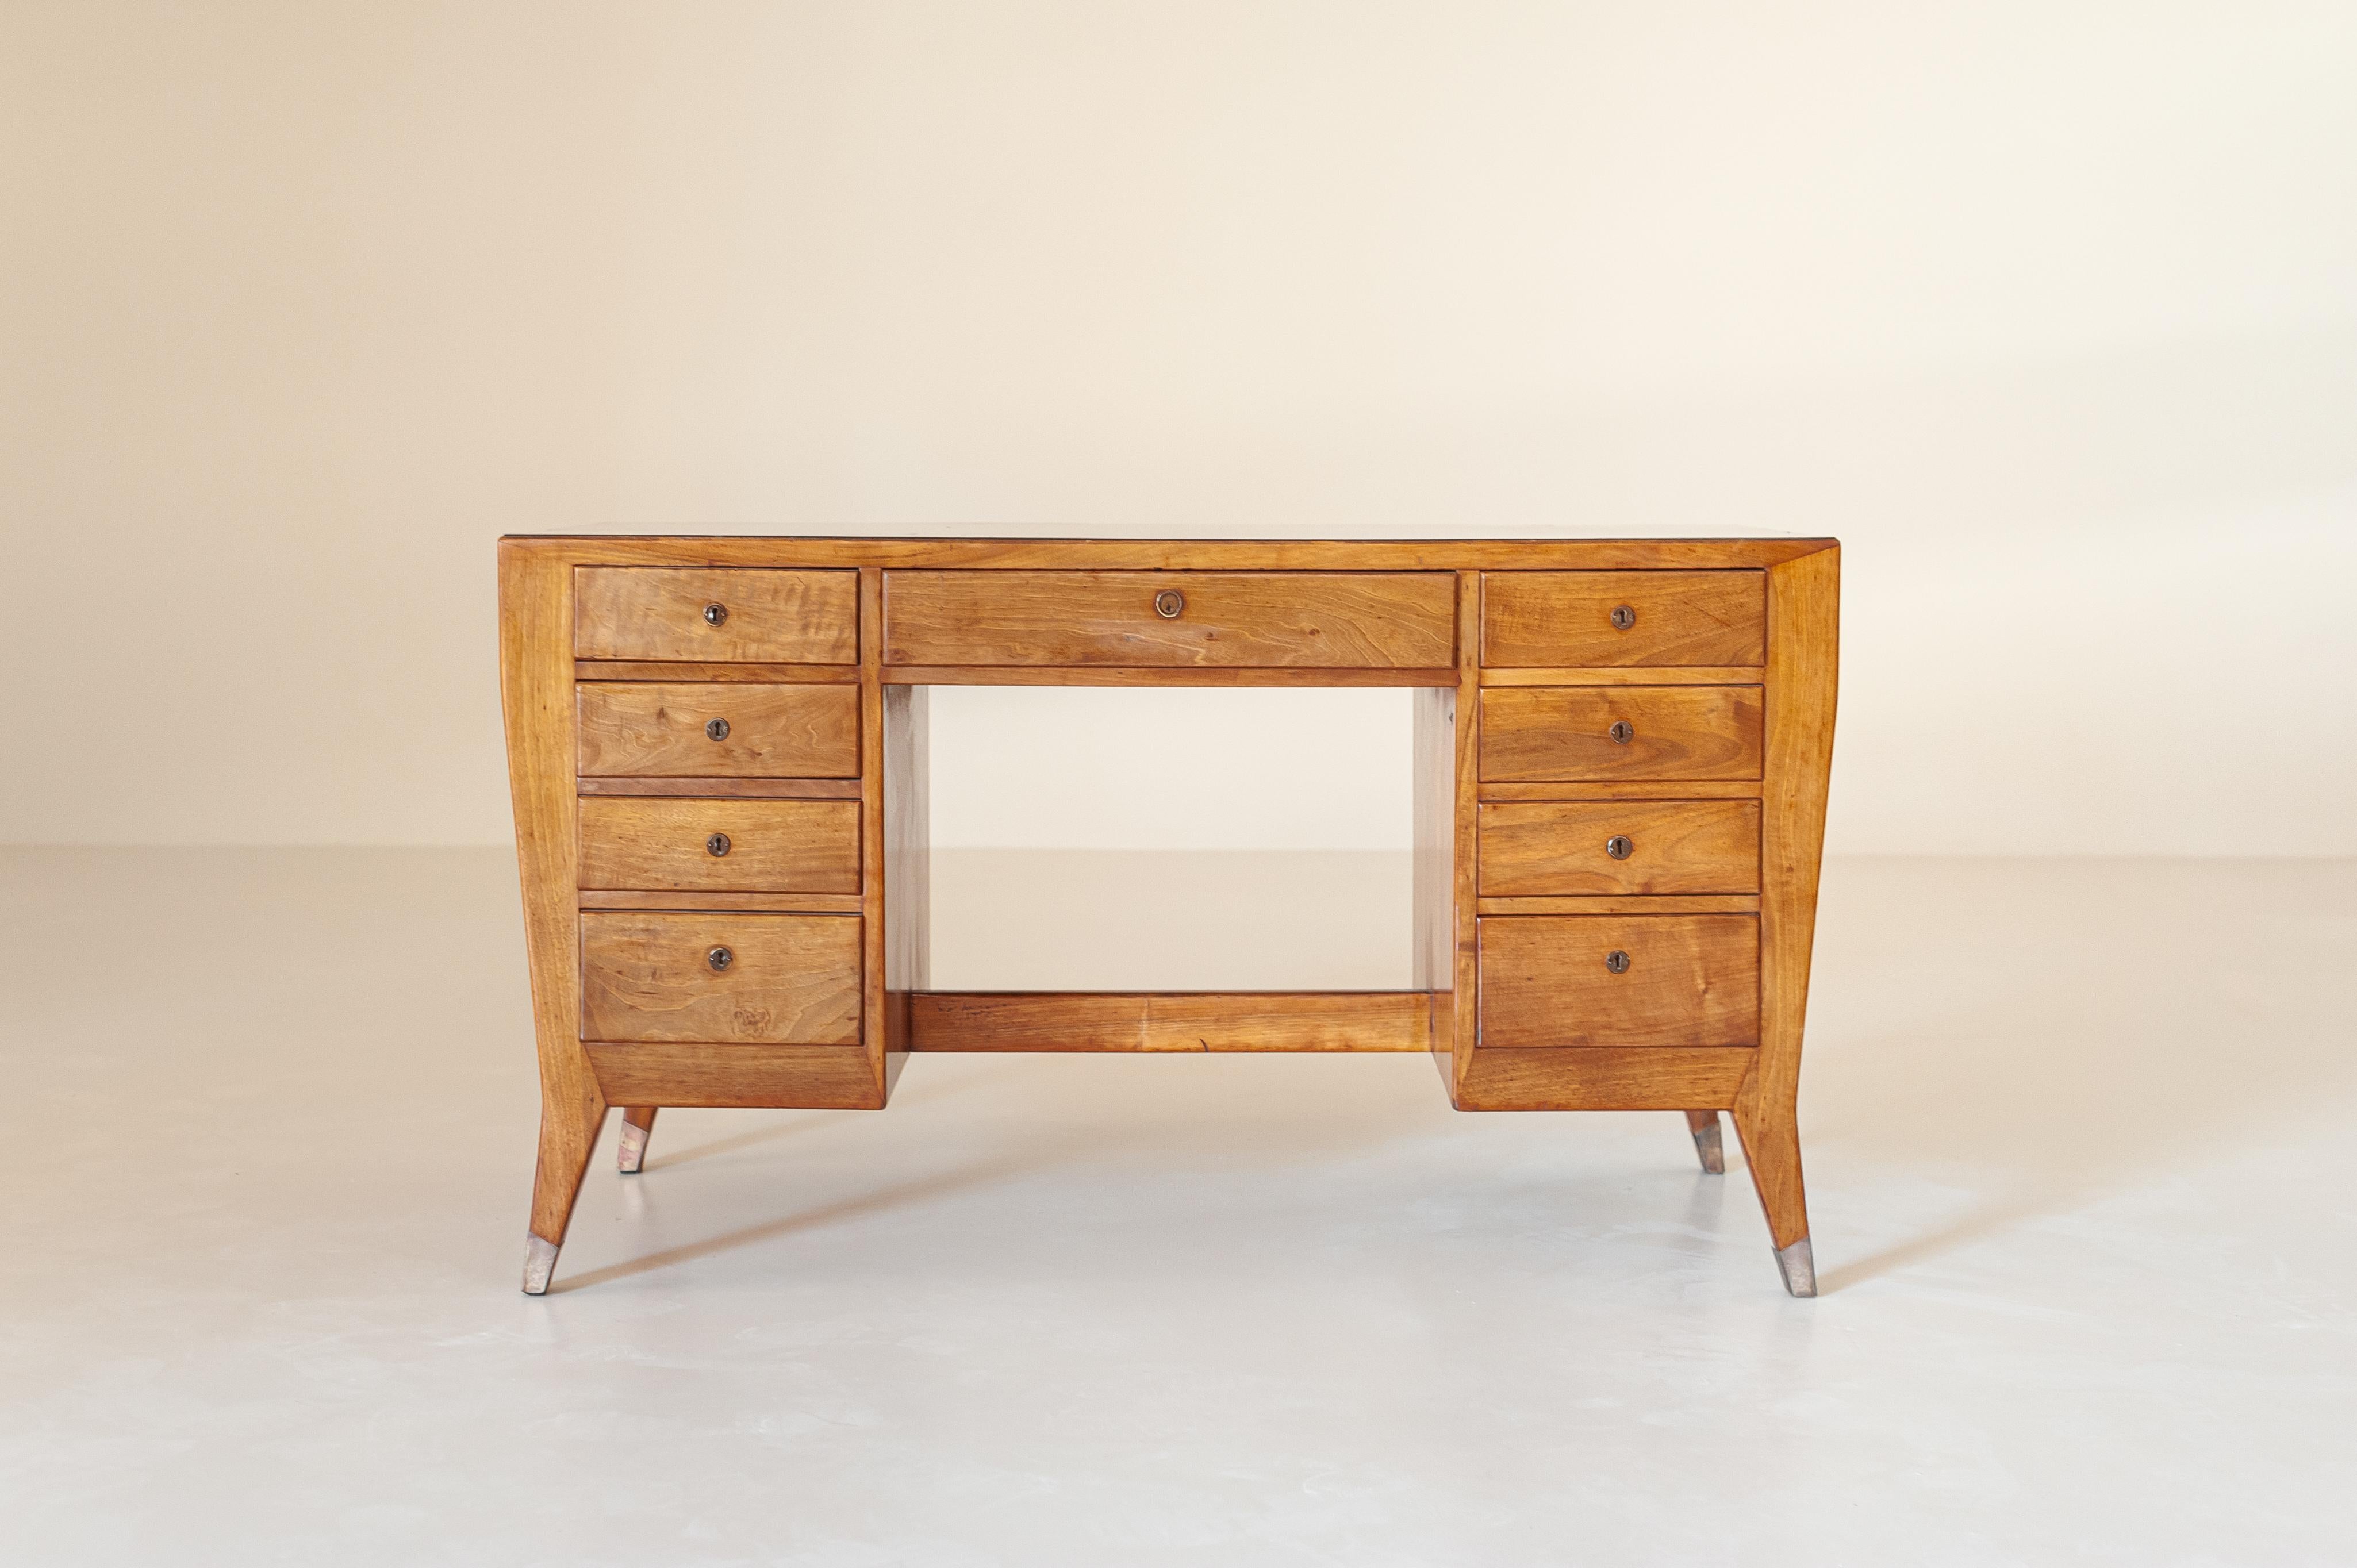 Italian Gio Ponti Writing Desk in Walnut and Brass for the BNL Offices, Italy 1940s For Sale